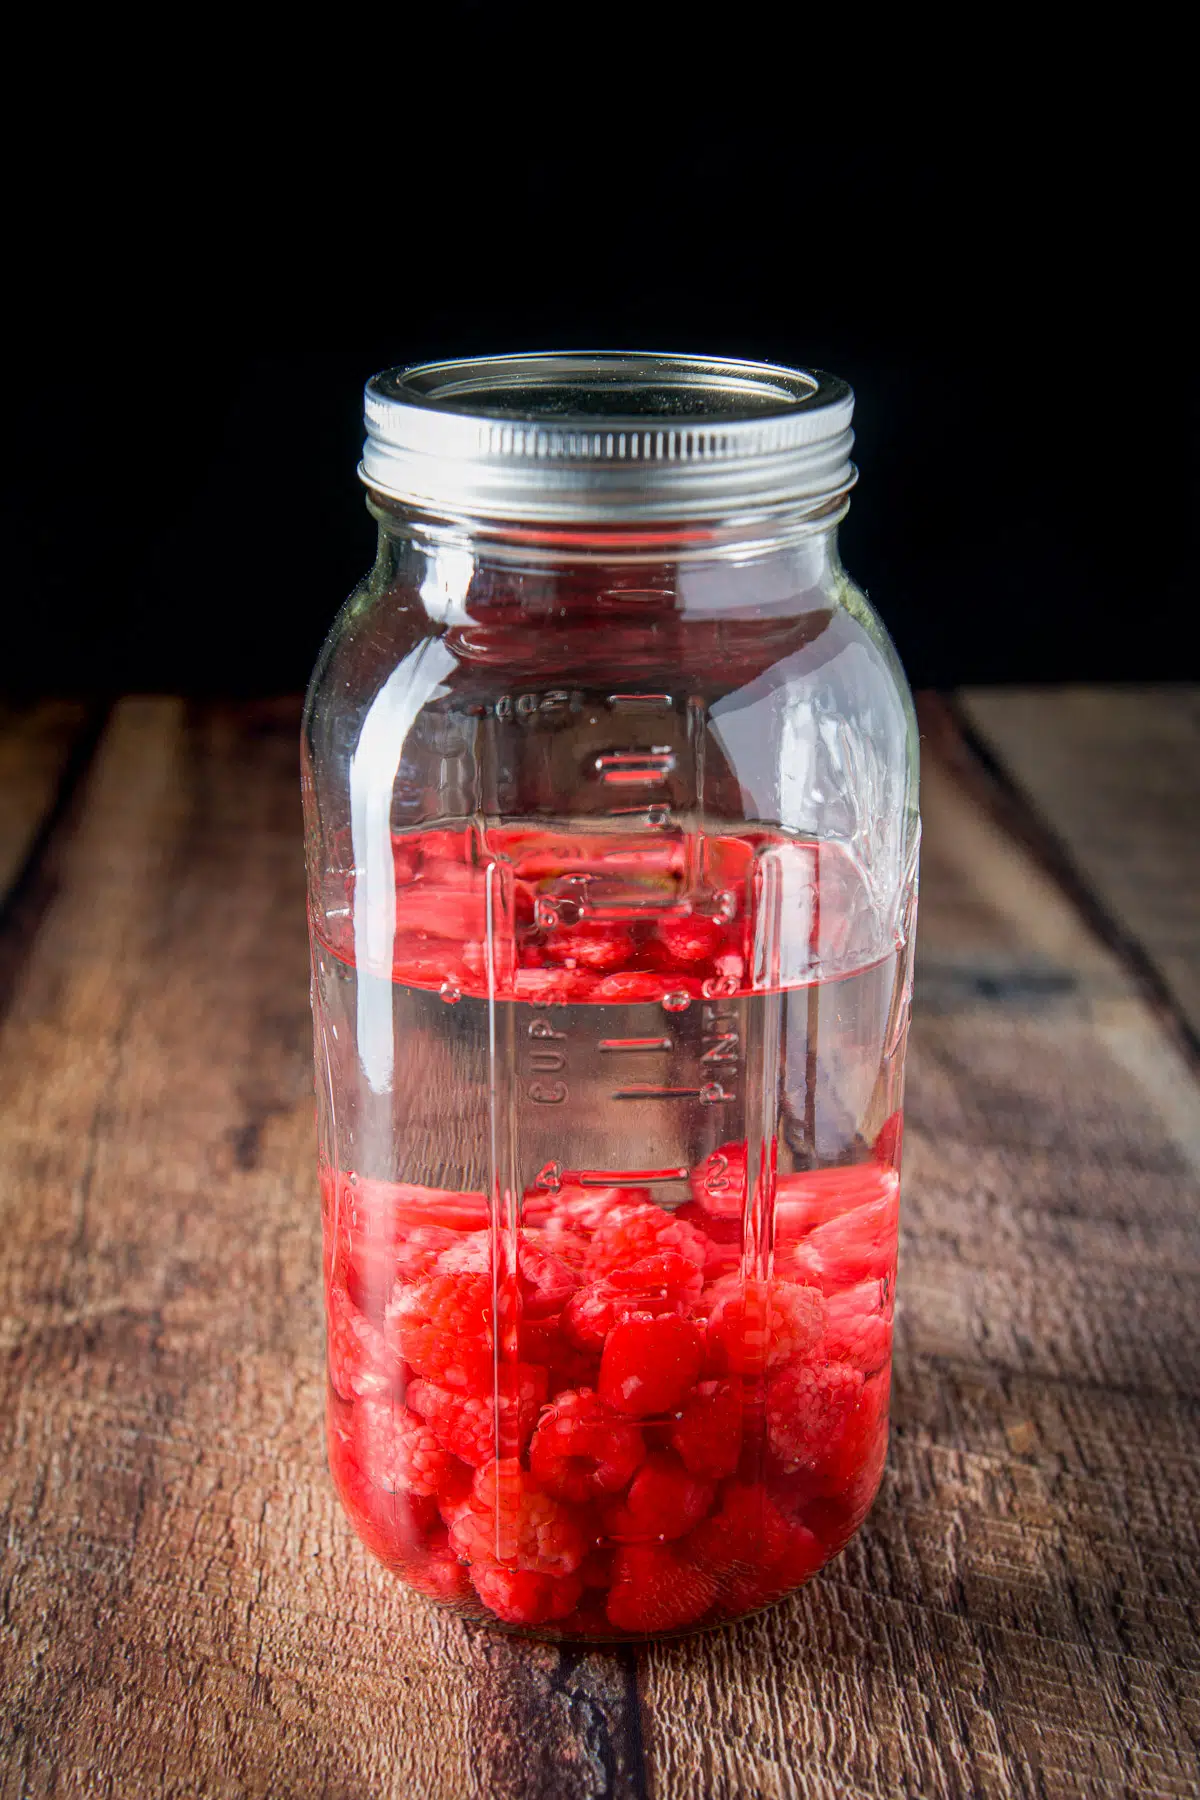 A capped jar with vodka and raspberries in it